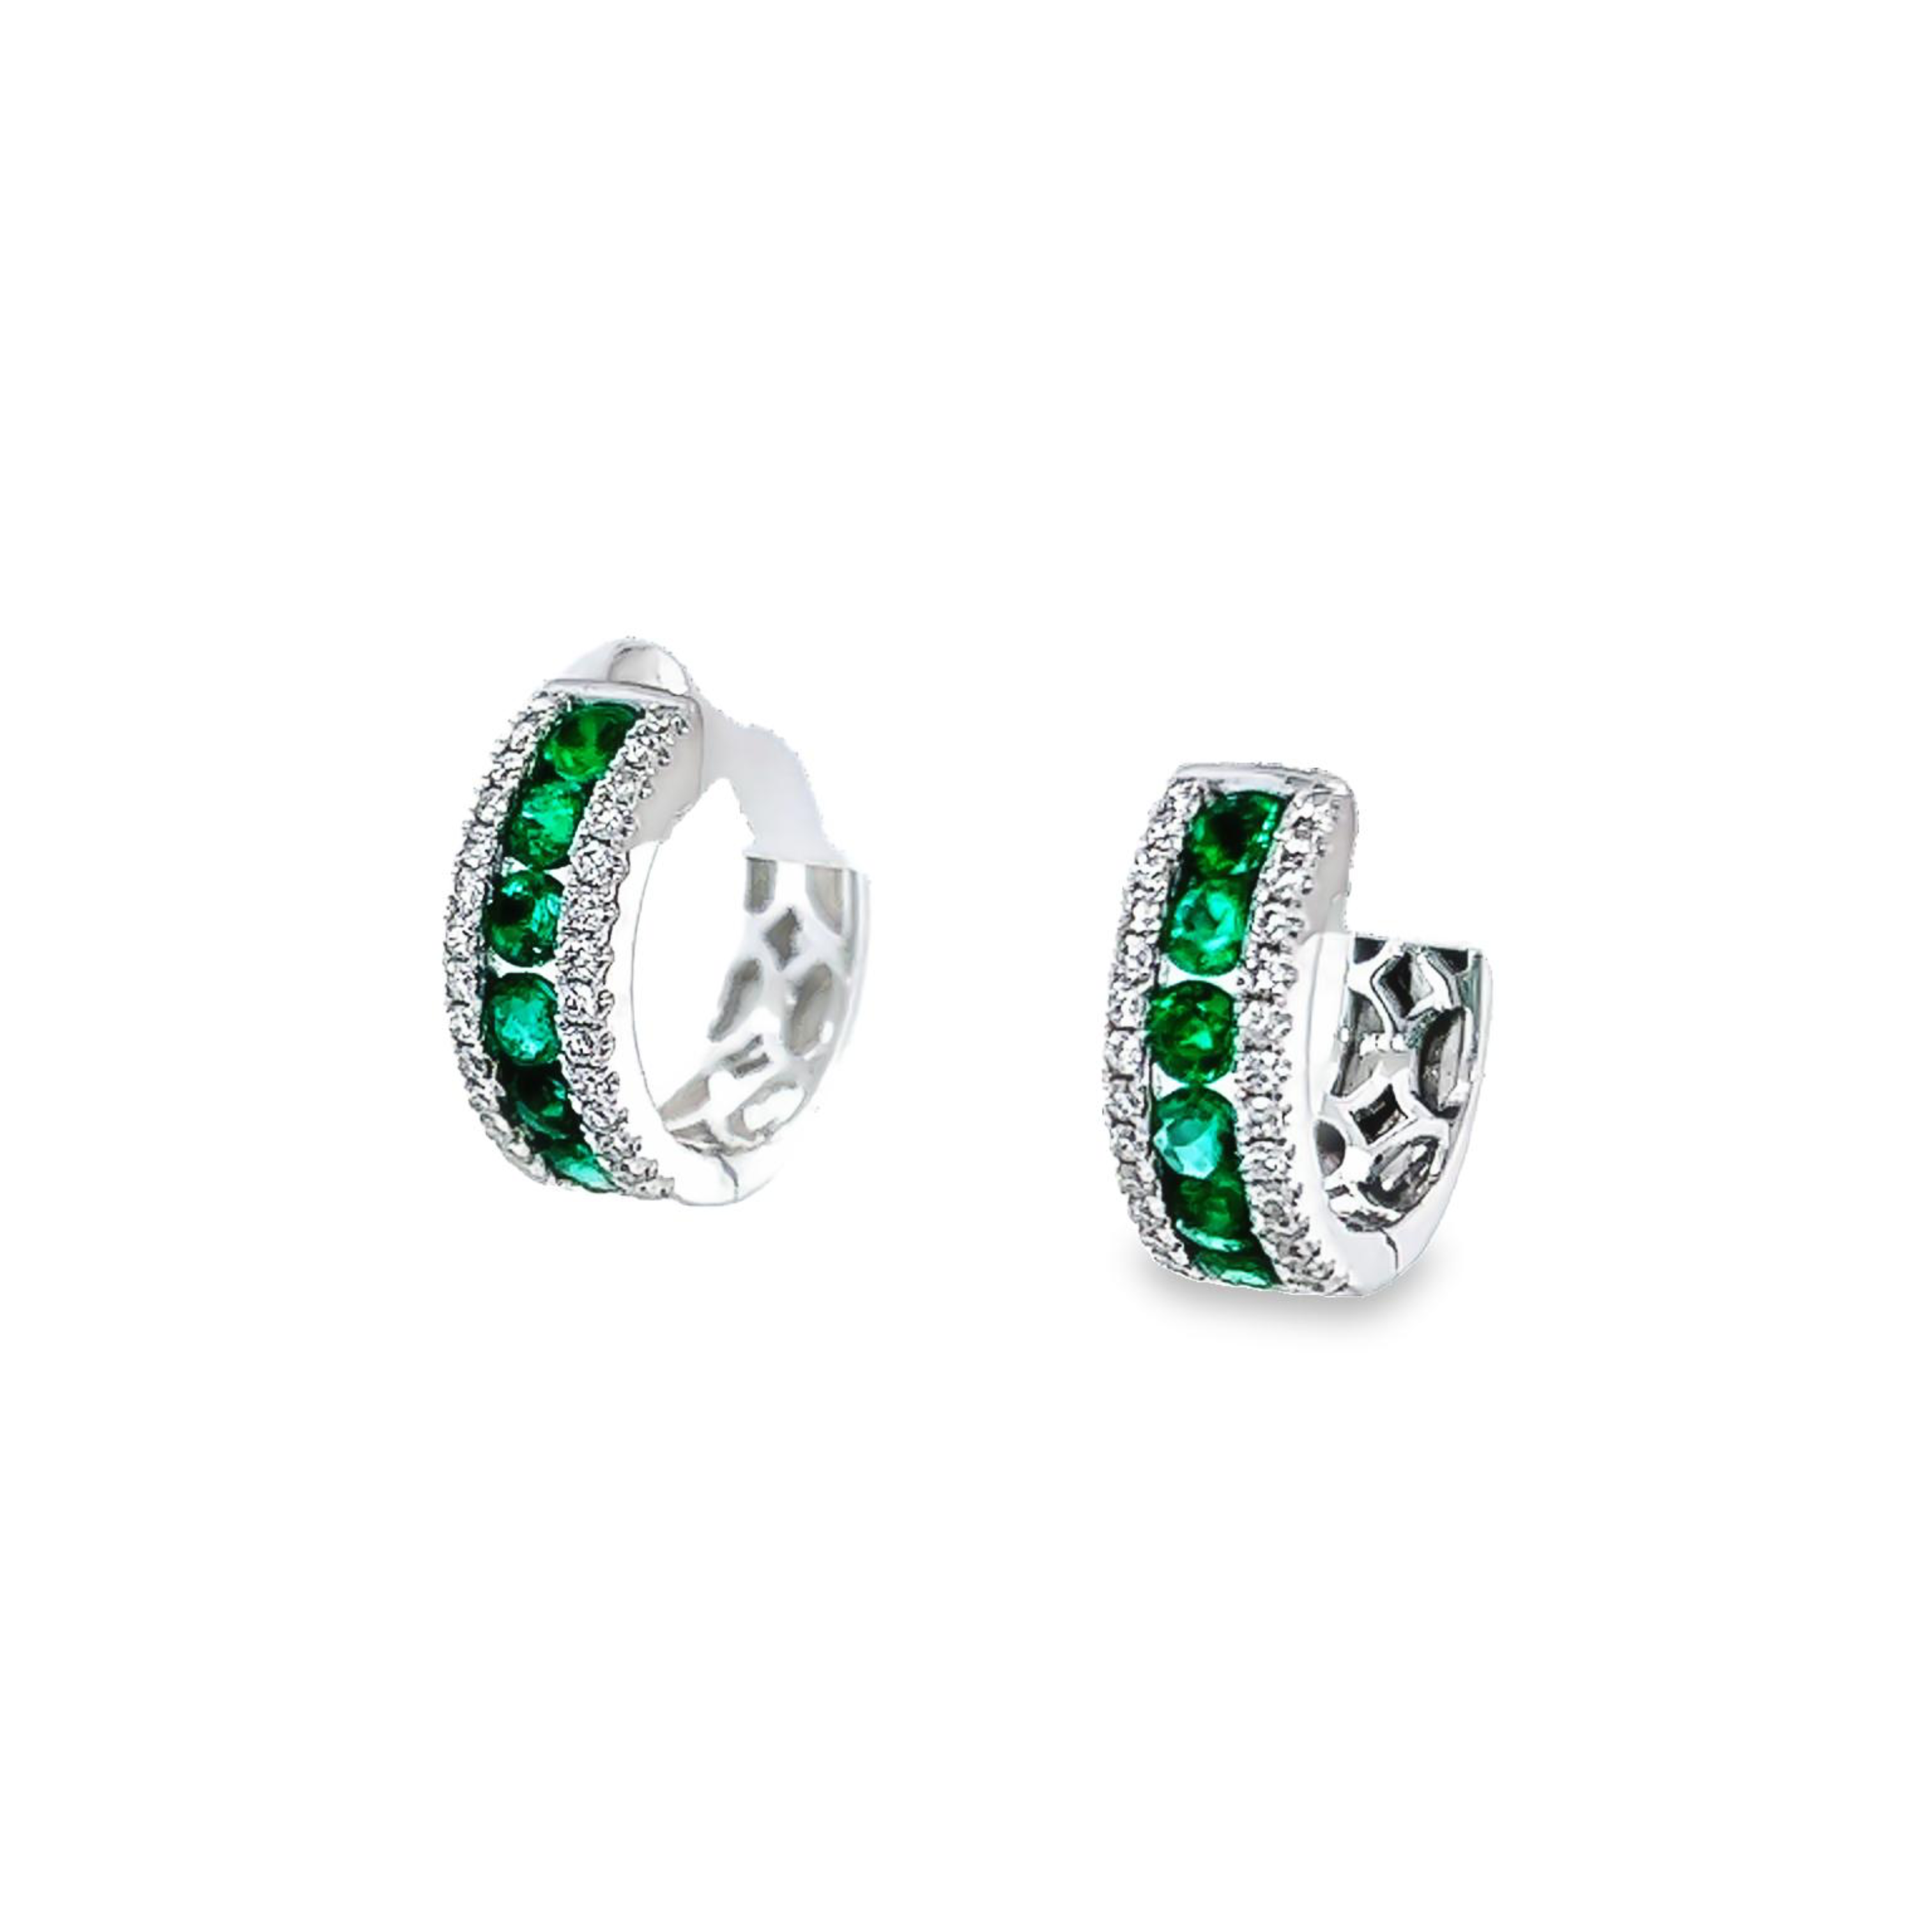 14 Karat White Gold Earrings With 12=0.68 Total Weight Round Mixed Cut Emeralds And 56=0.24 Total Weight Round Brilliant G Vs Diamonds